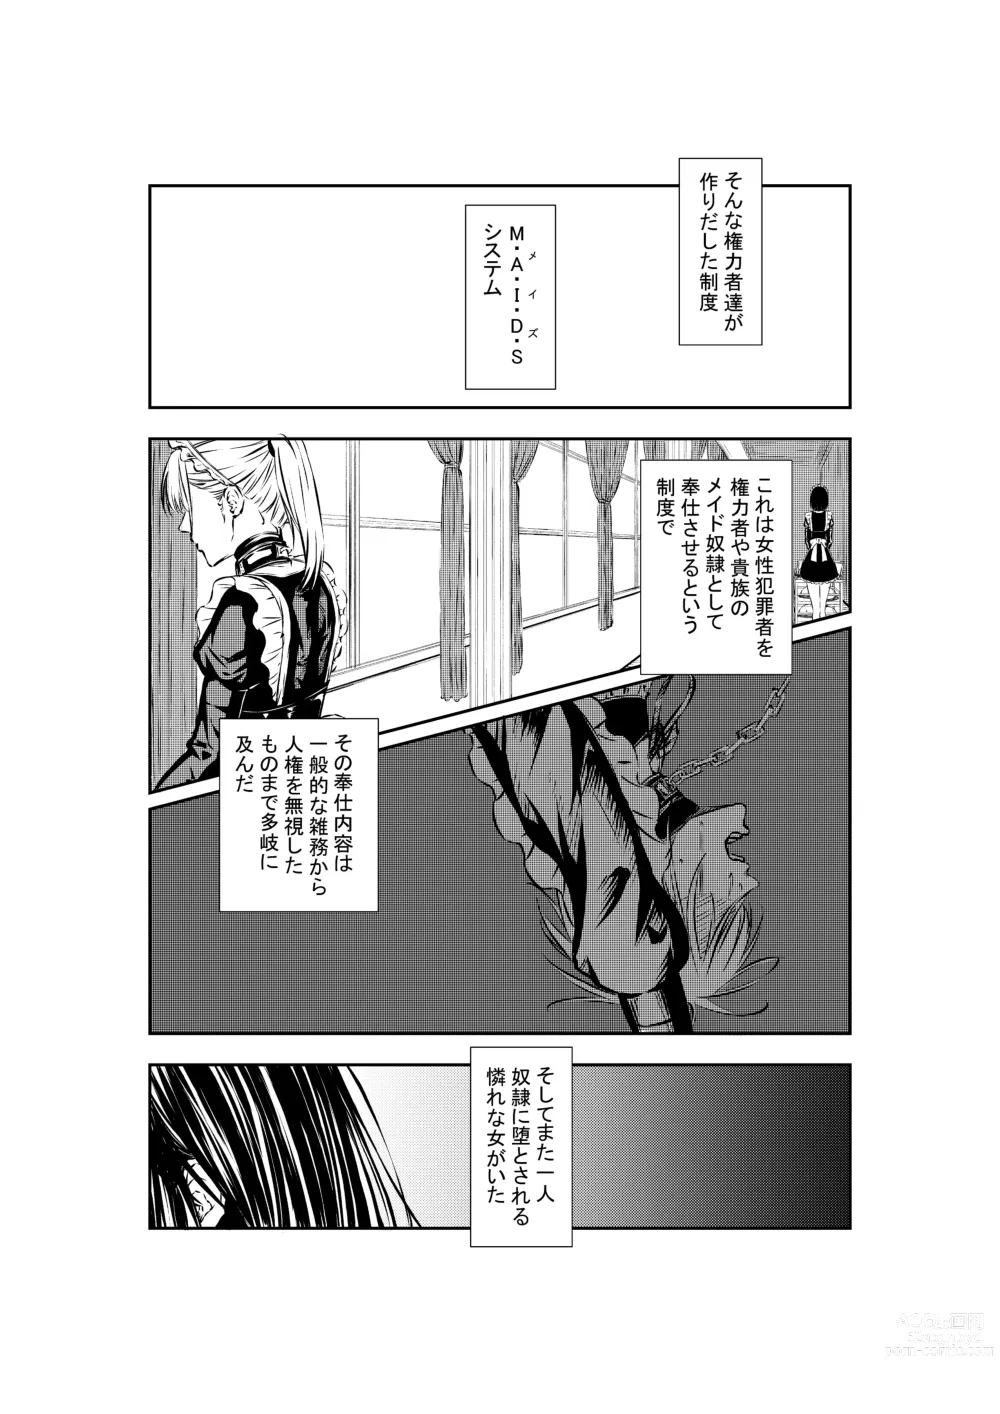 Page 2 of doujinshi M.A.I.D.S System